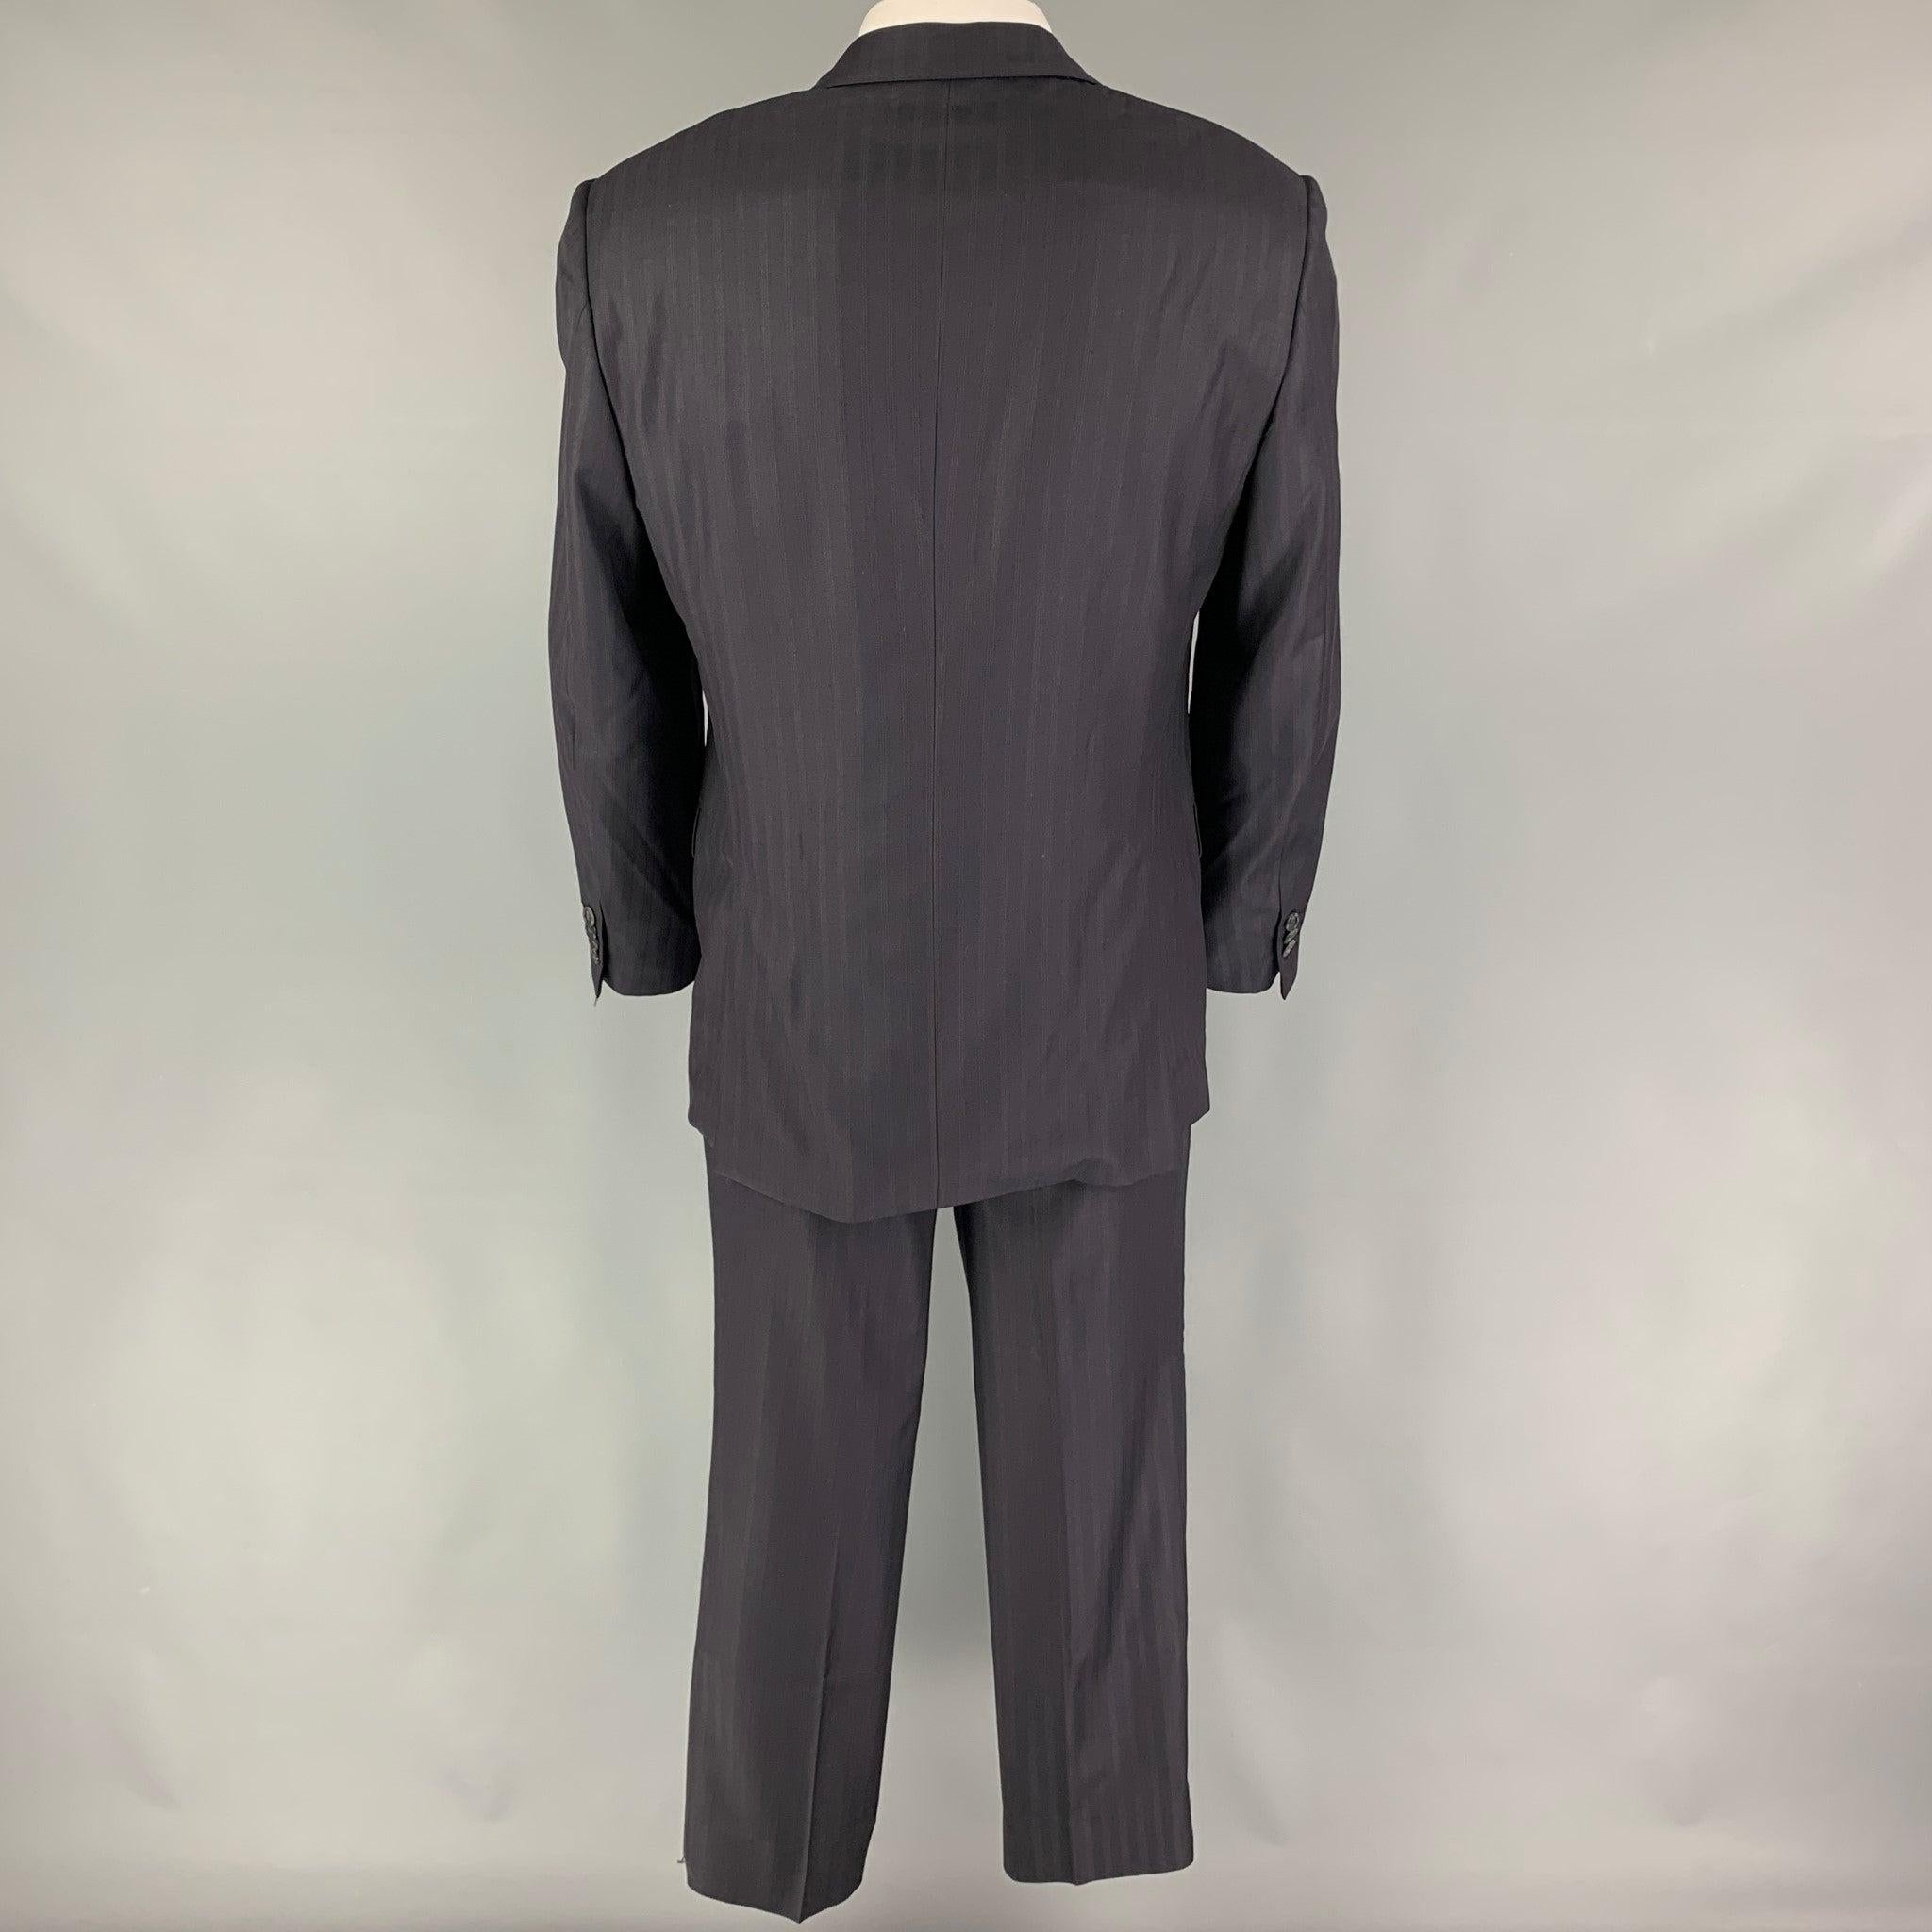 BRIONI Size 42 Navy Stripe Wool Notch Lapel Suit In Excellent Condition For Sale In San Francisco, CA